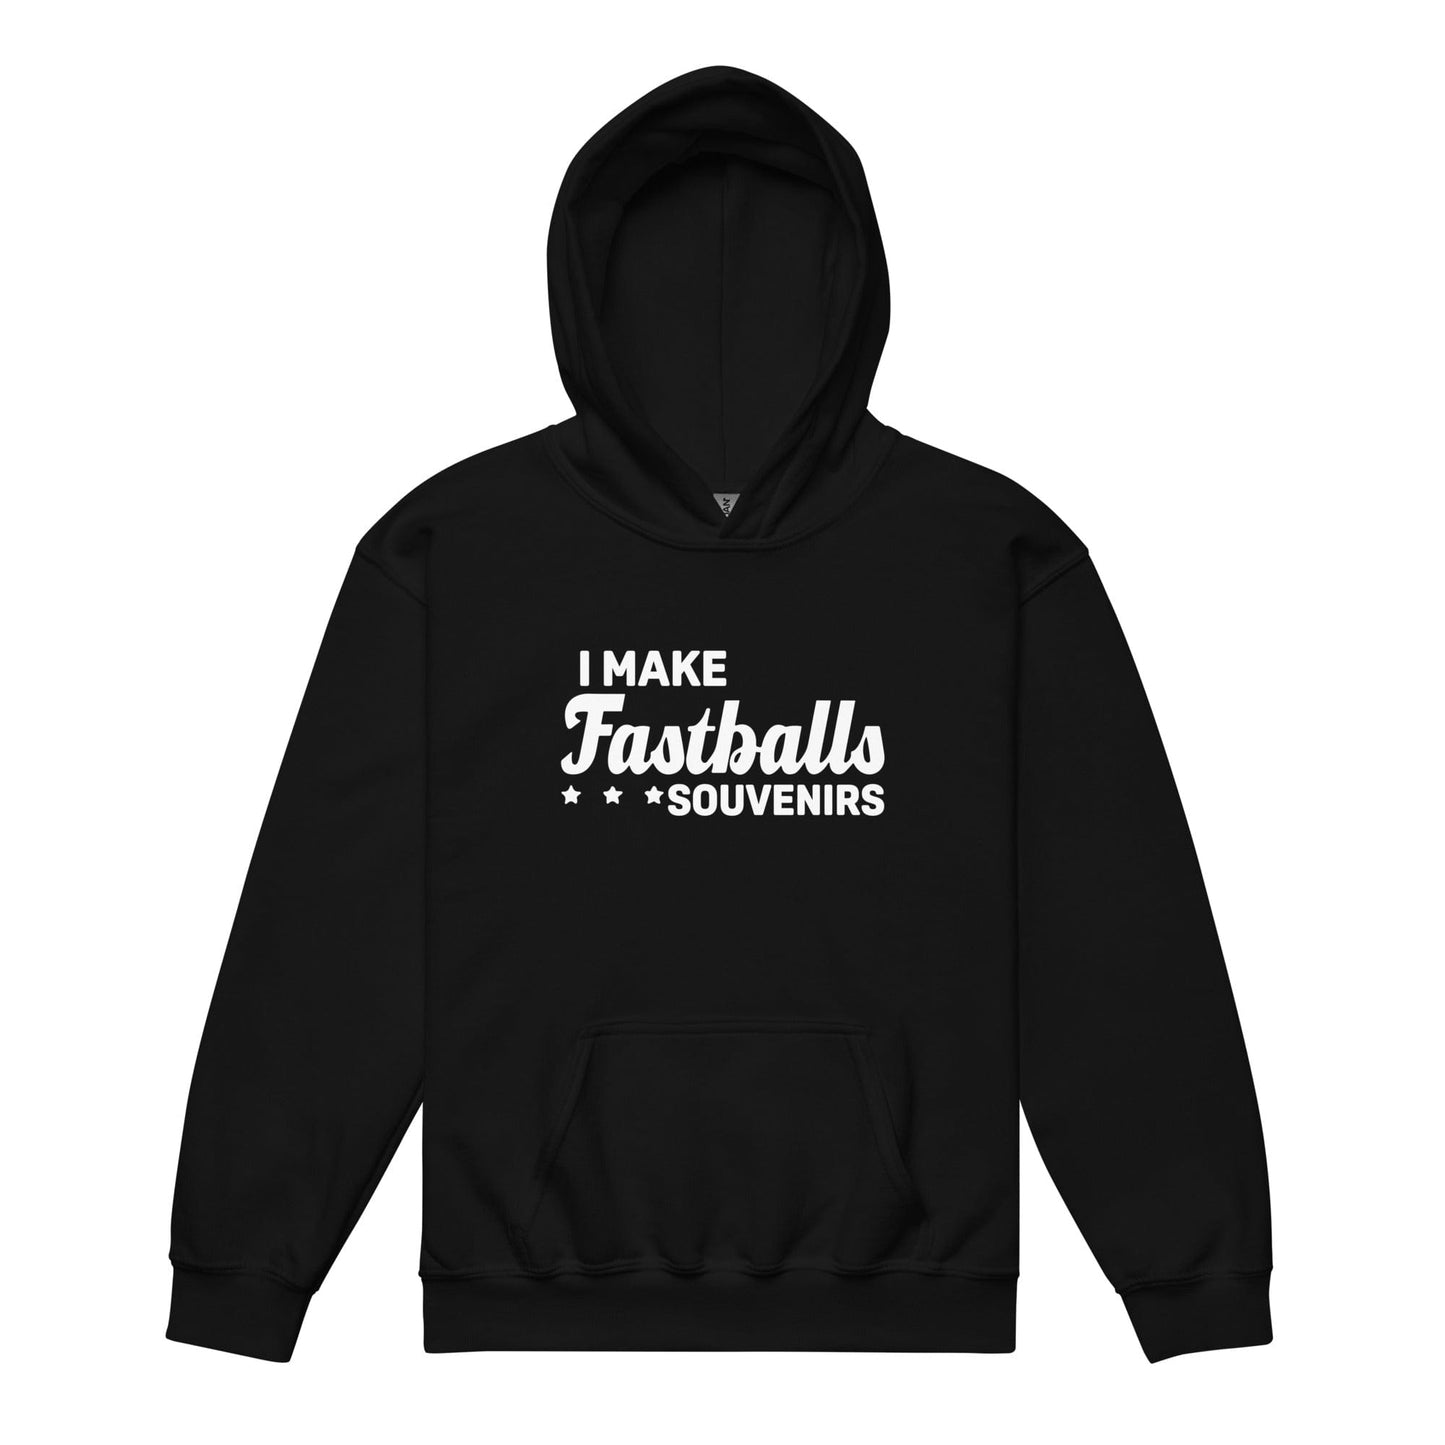 I Make Fastballs Souvenirs - Youth Hoodie